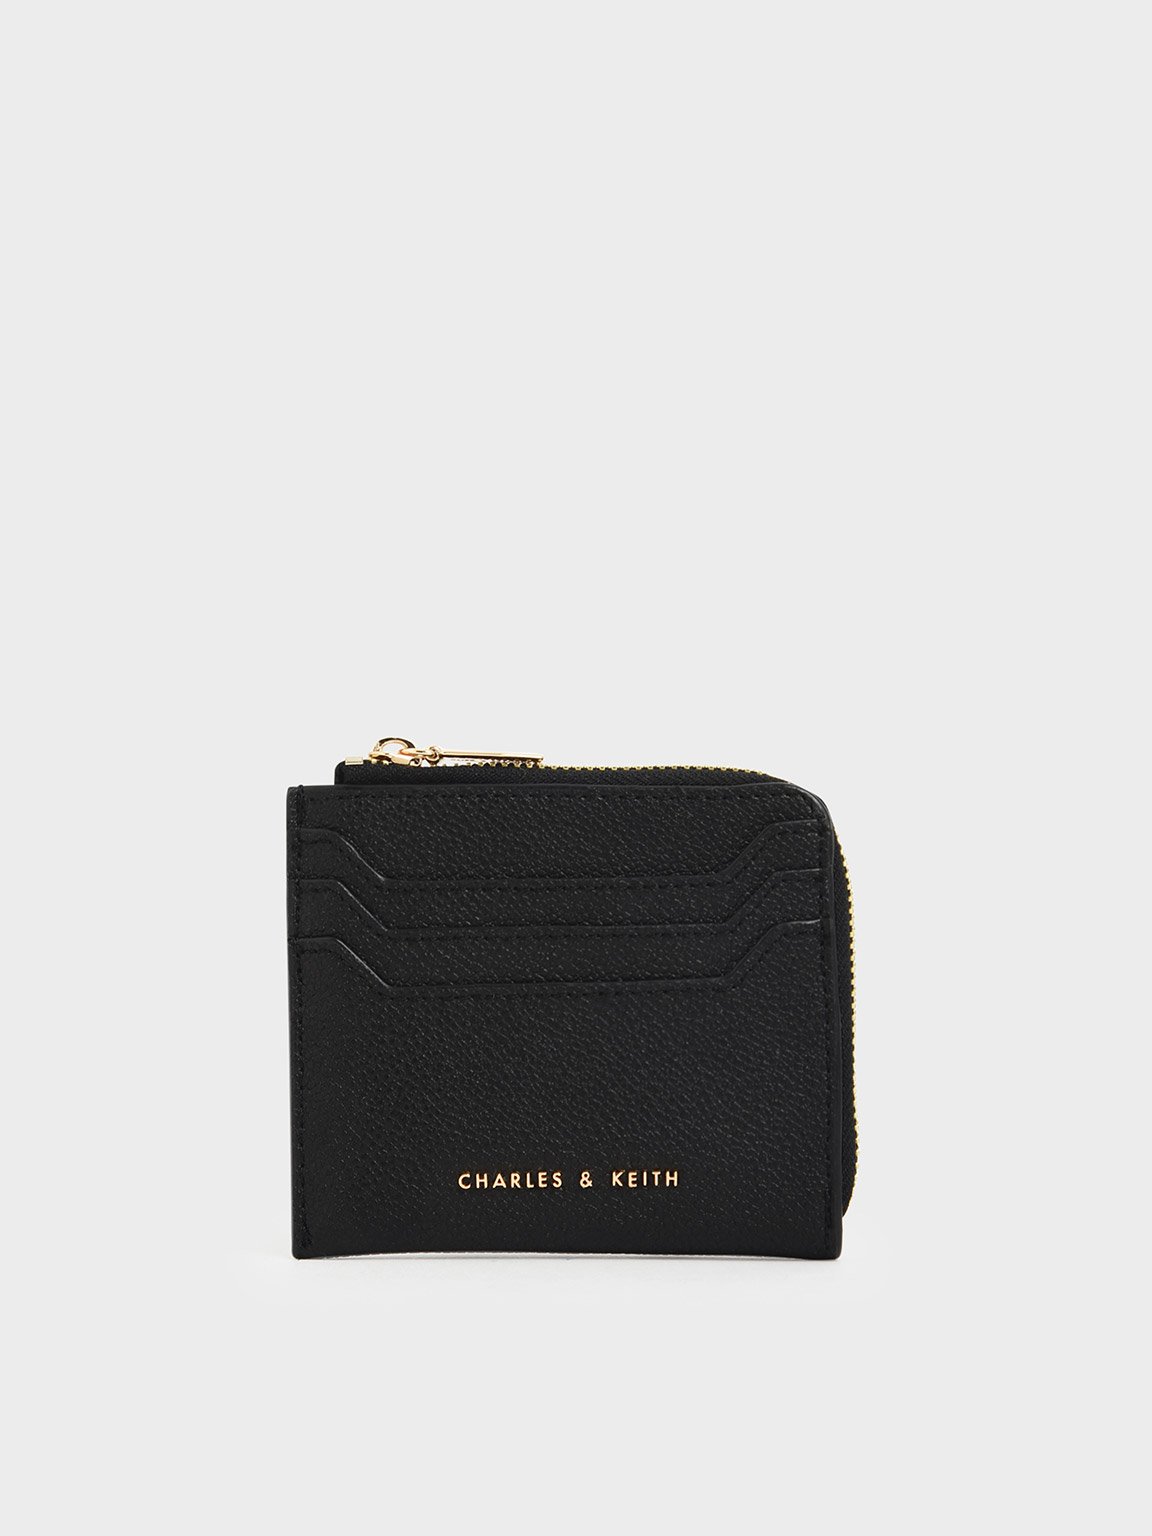 Black Small Zip Pouch - CHARLES & KEITH TH